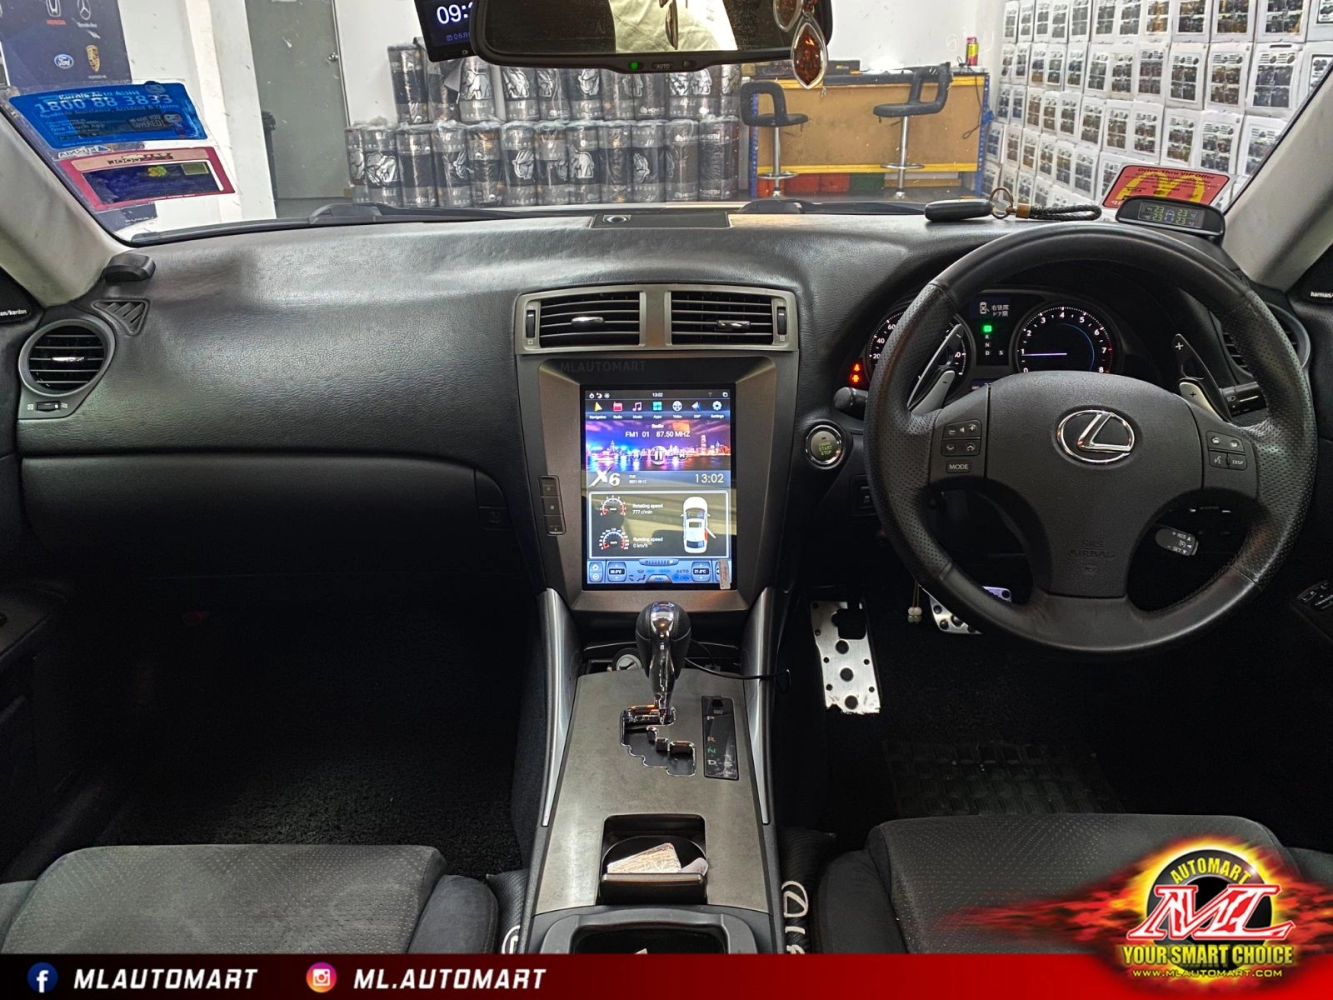 Lexus IS250 XE20 Vertical Style Android Monitor (12.1")